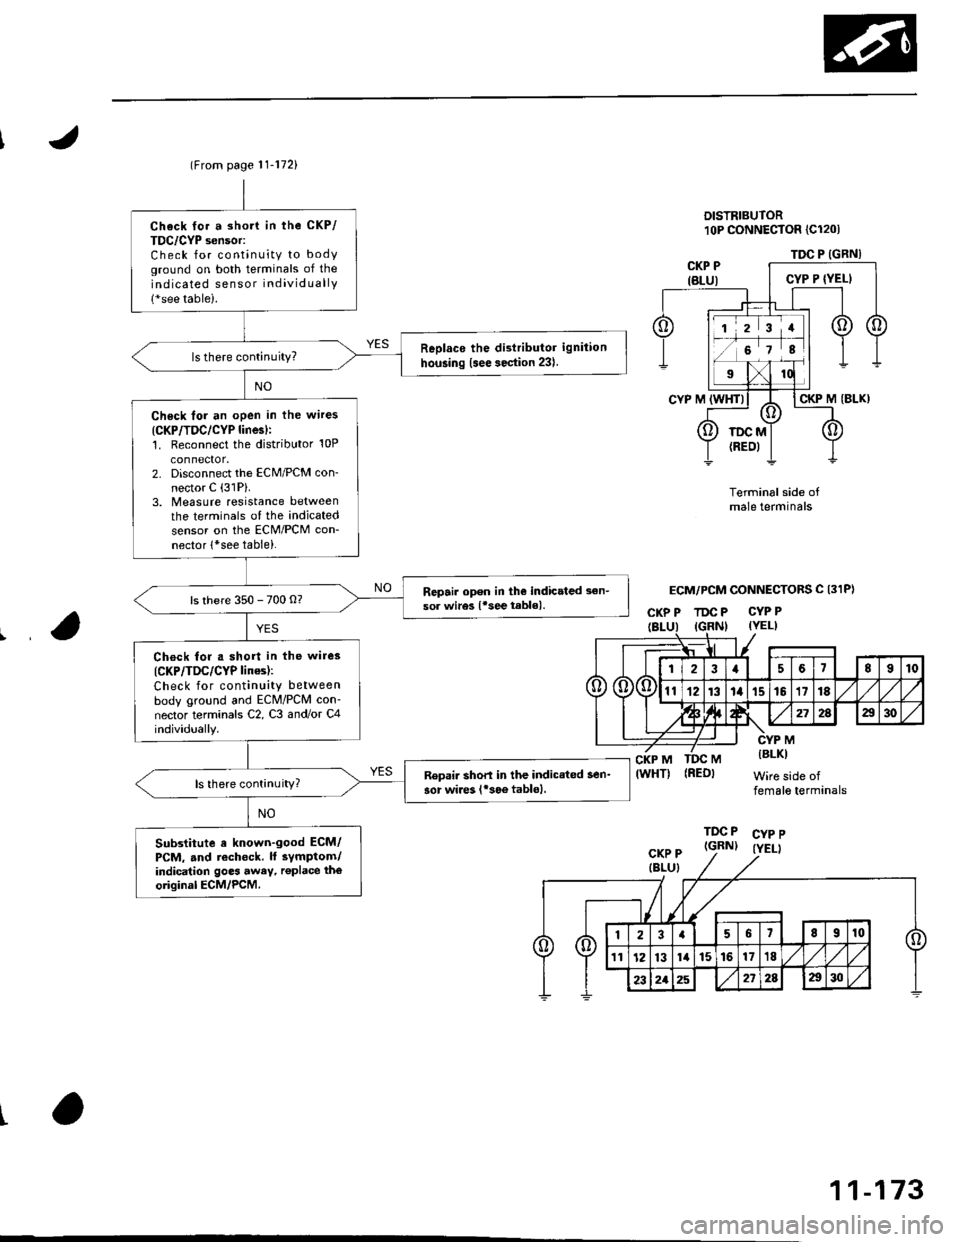 HONDA CIVIC 1998 6.G Workshop Manual (From page | 1-172)
Check fo. a sho.t in the CKP/
TDC/CYP sensor:Check for continuity to bodYground on both terminals of the
indicated senso r individually
1*see table).
Replaco the di3tributor igniti